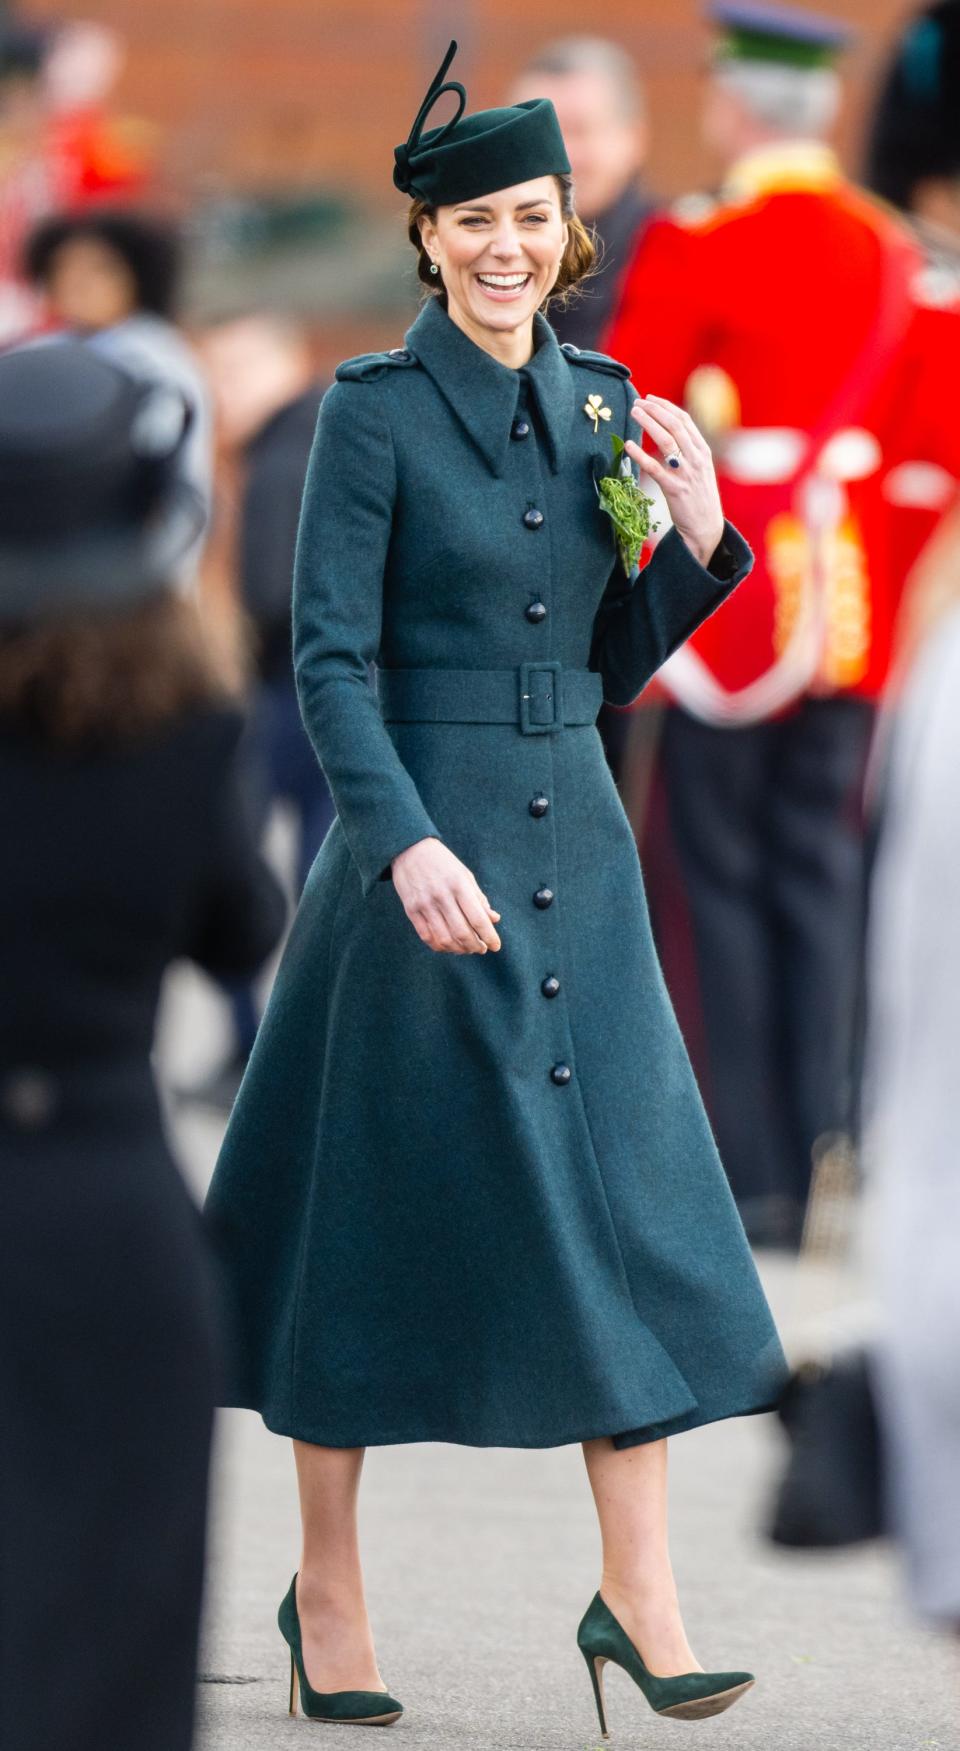 Kate Middleton wearing a green dress on St Patrick's Day in 2022